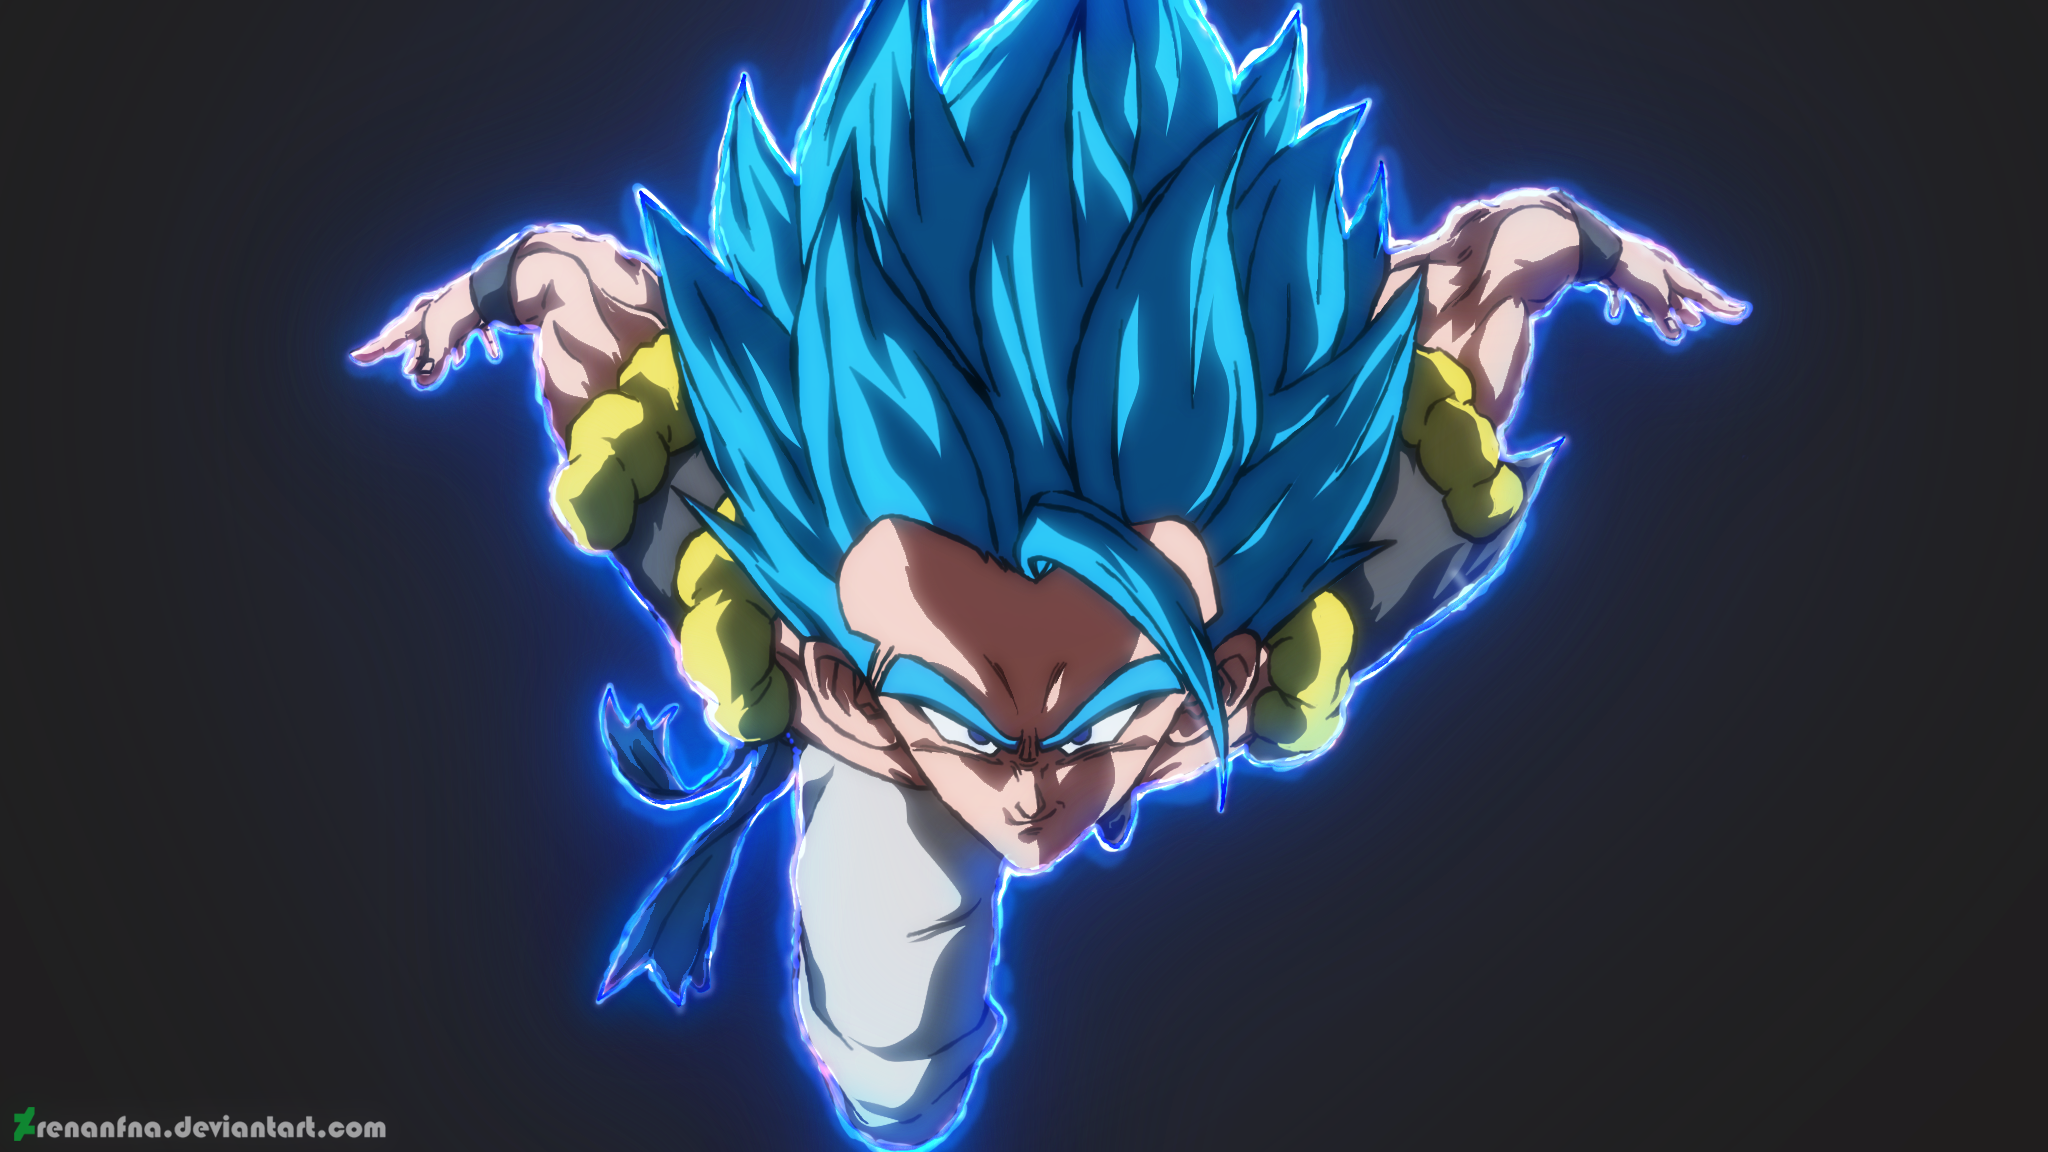 Free Download Gogeta Ss Blue Hd Wallpaper Background Image 48x1152 Id 48x1152 For Your Desktop Mobile Tablet Explore Blue Gogeta Wallpapers Blue Gogeta Wallpapers Gogeta Wallpaper Gogeta Wallpapers